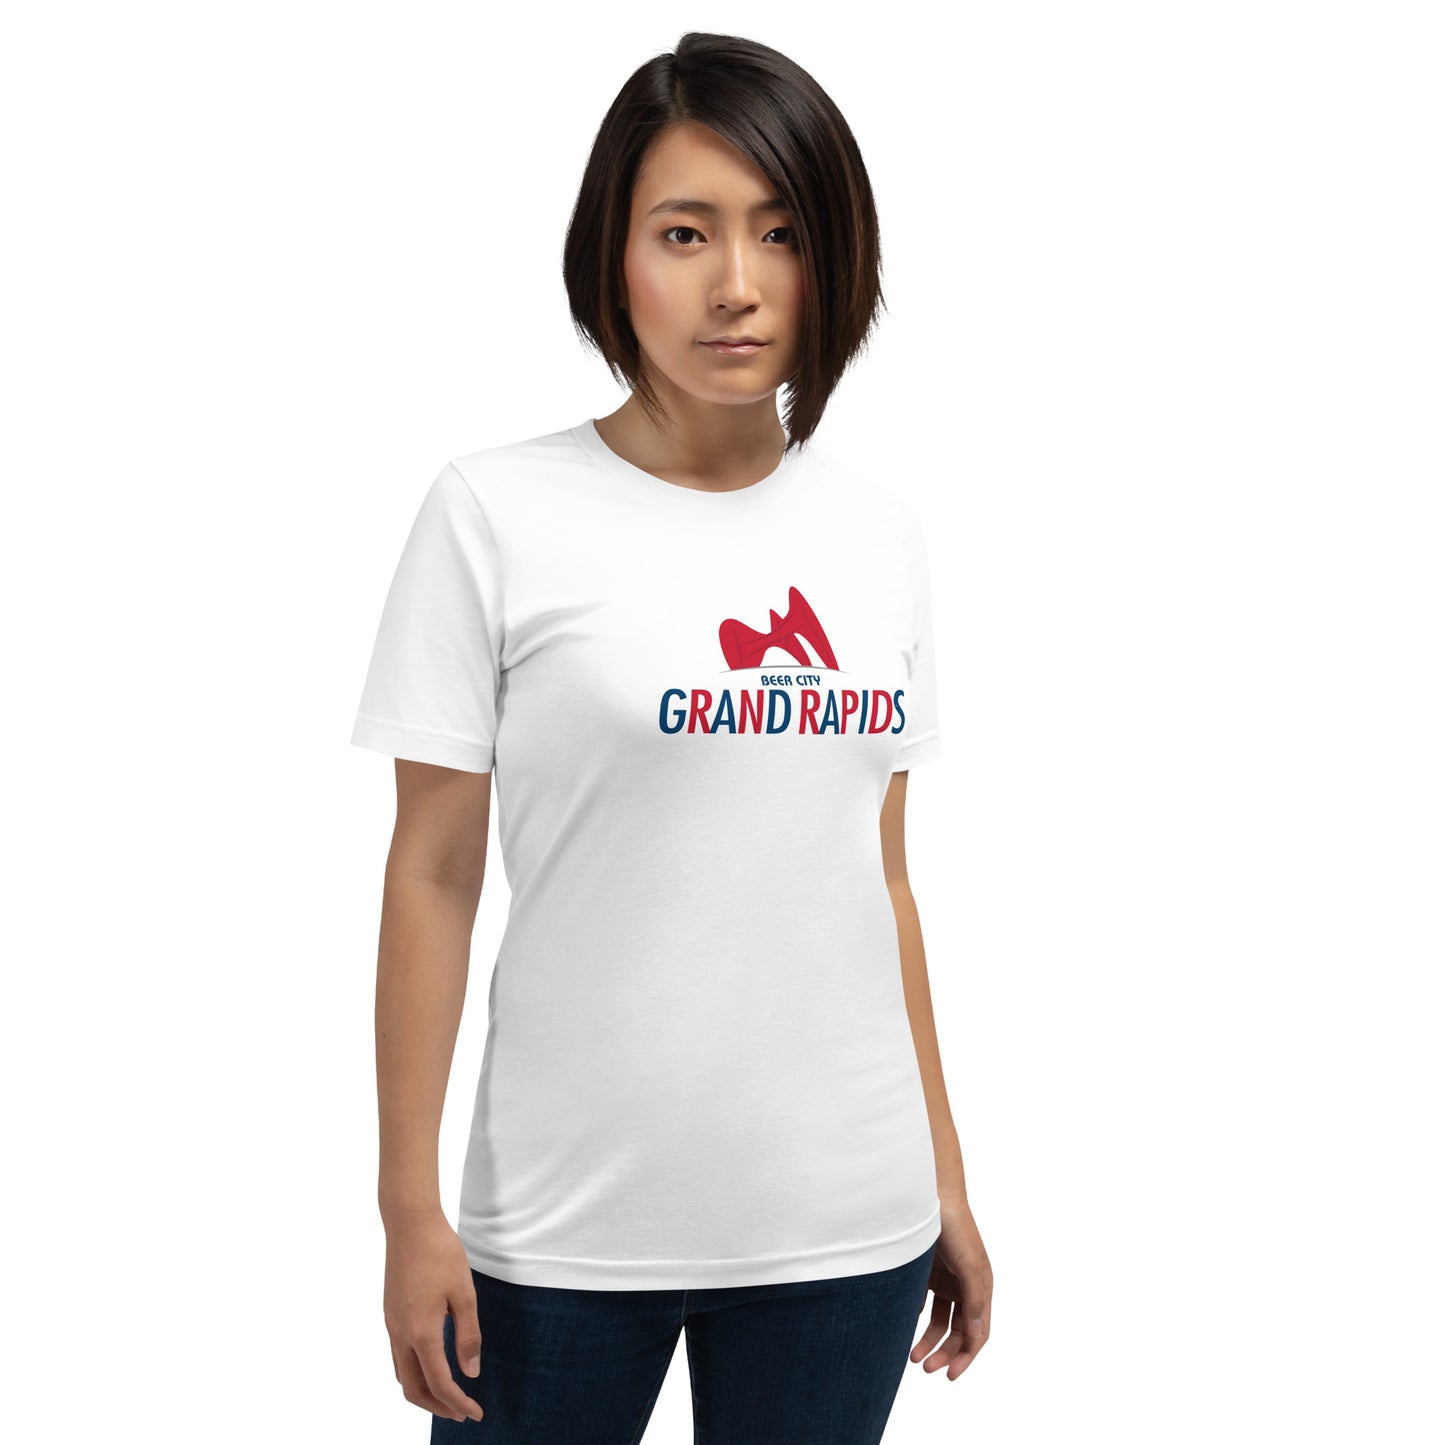 The Canadian T-shirt